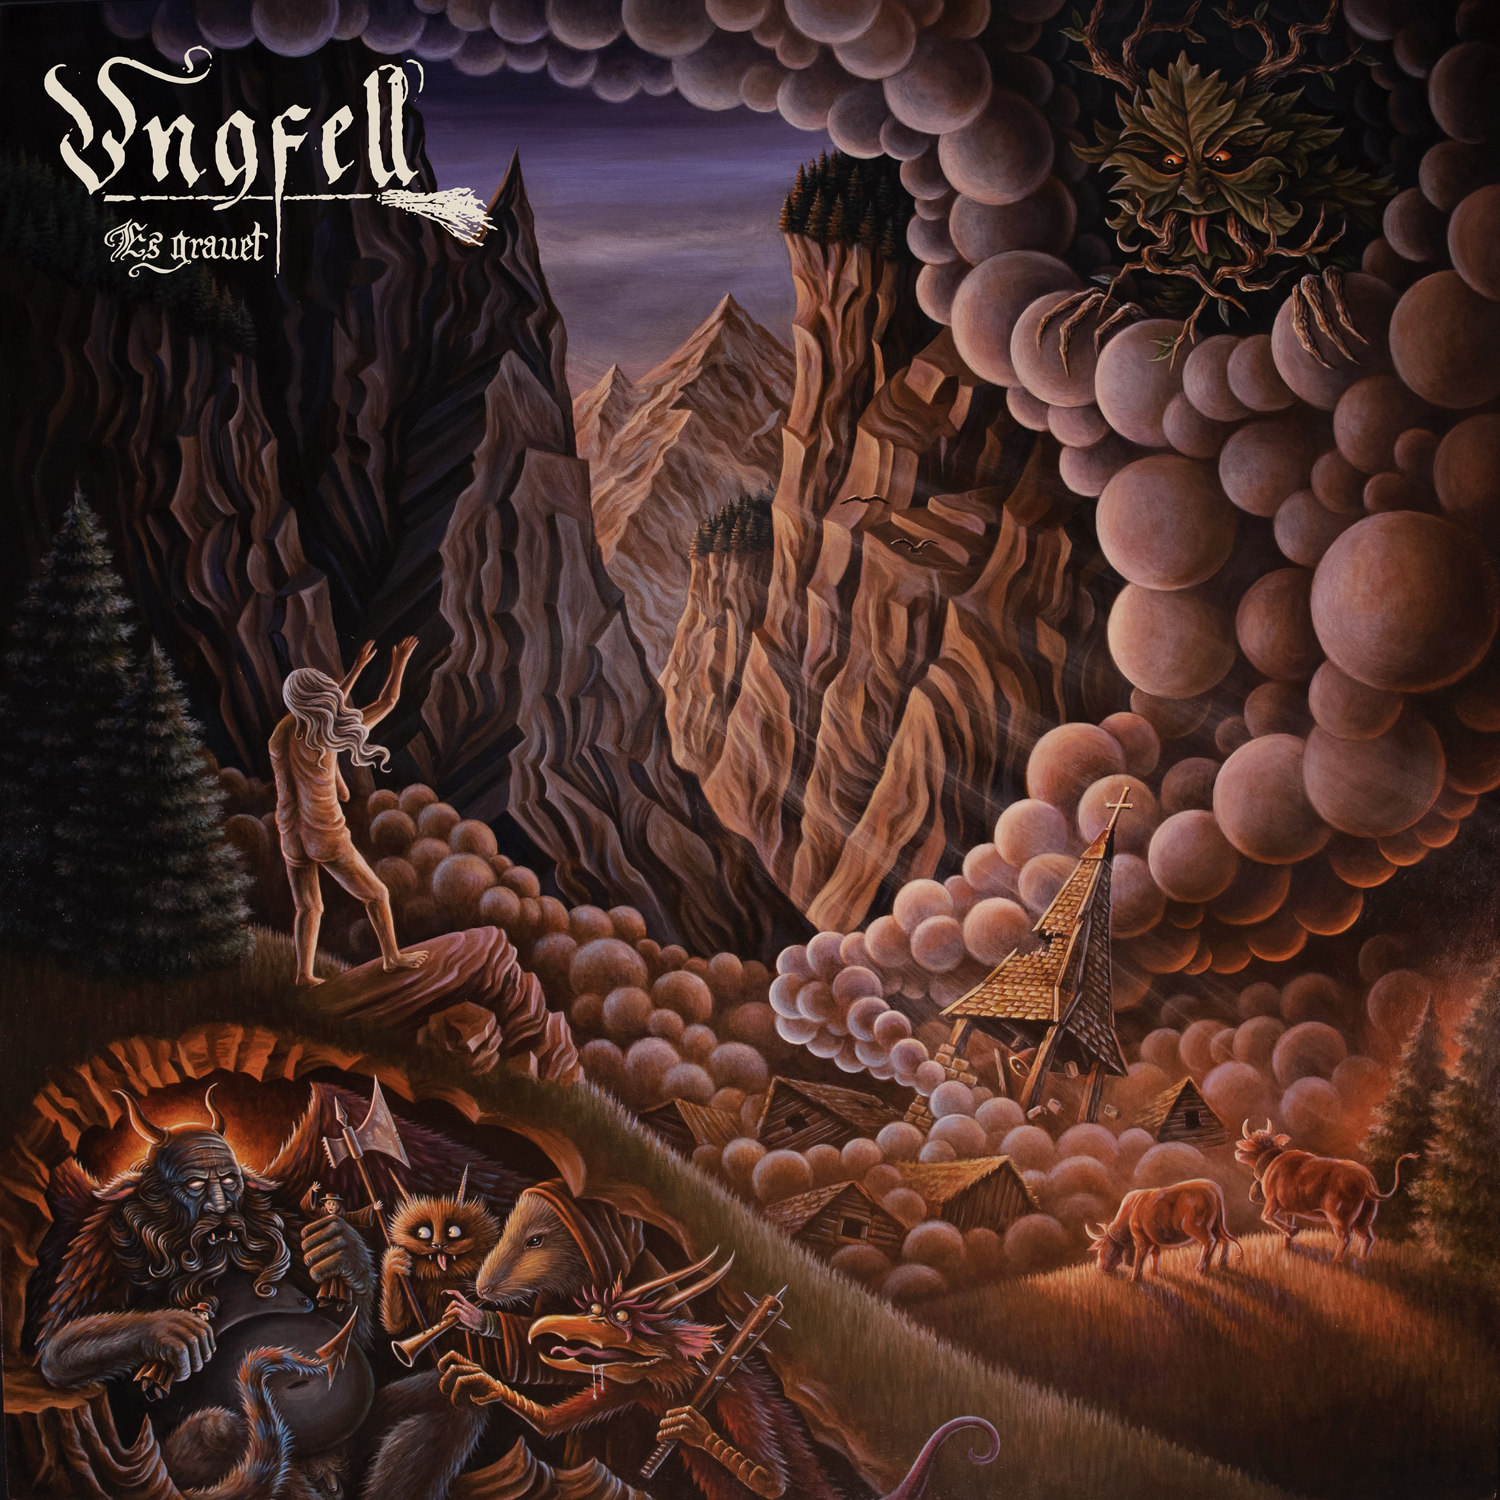 Review: Ungfell - Es grauet